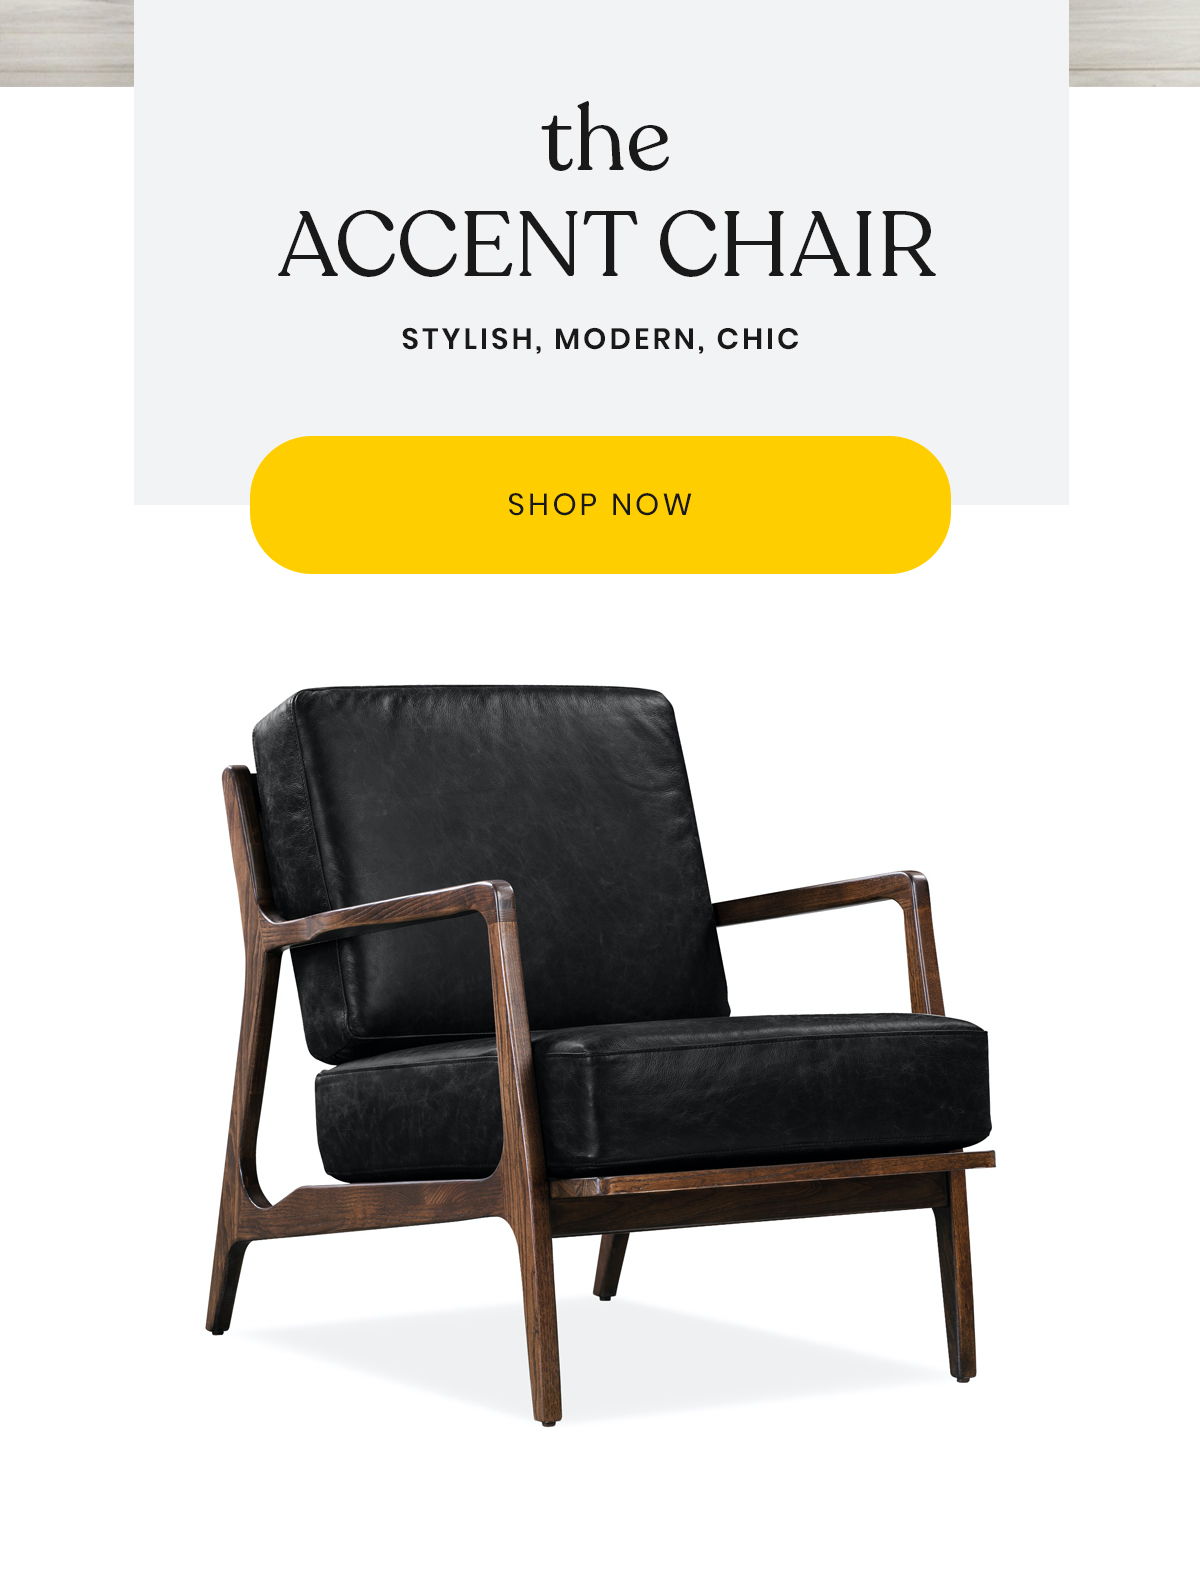 The Accent Chair - Stylish, modern & chic